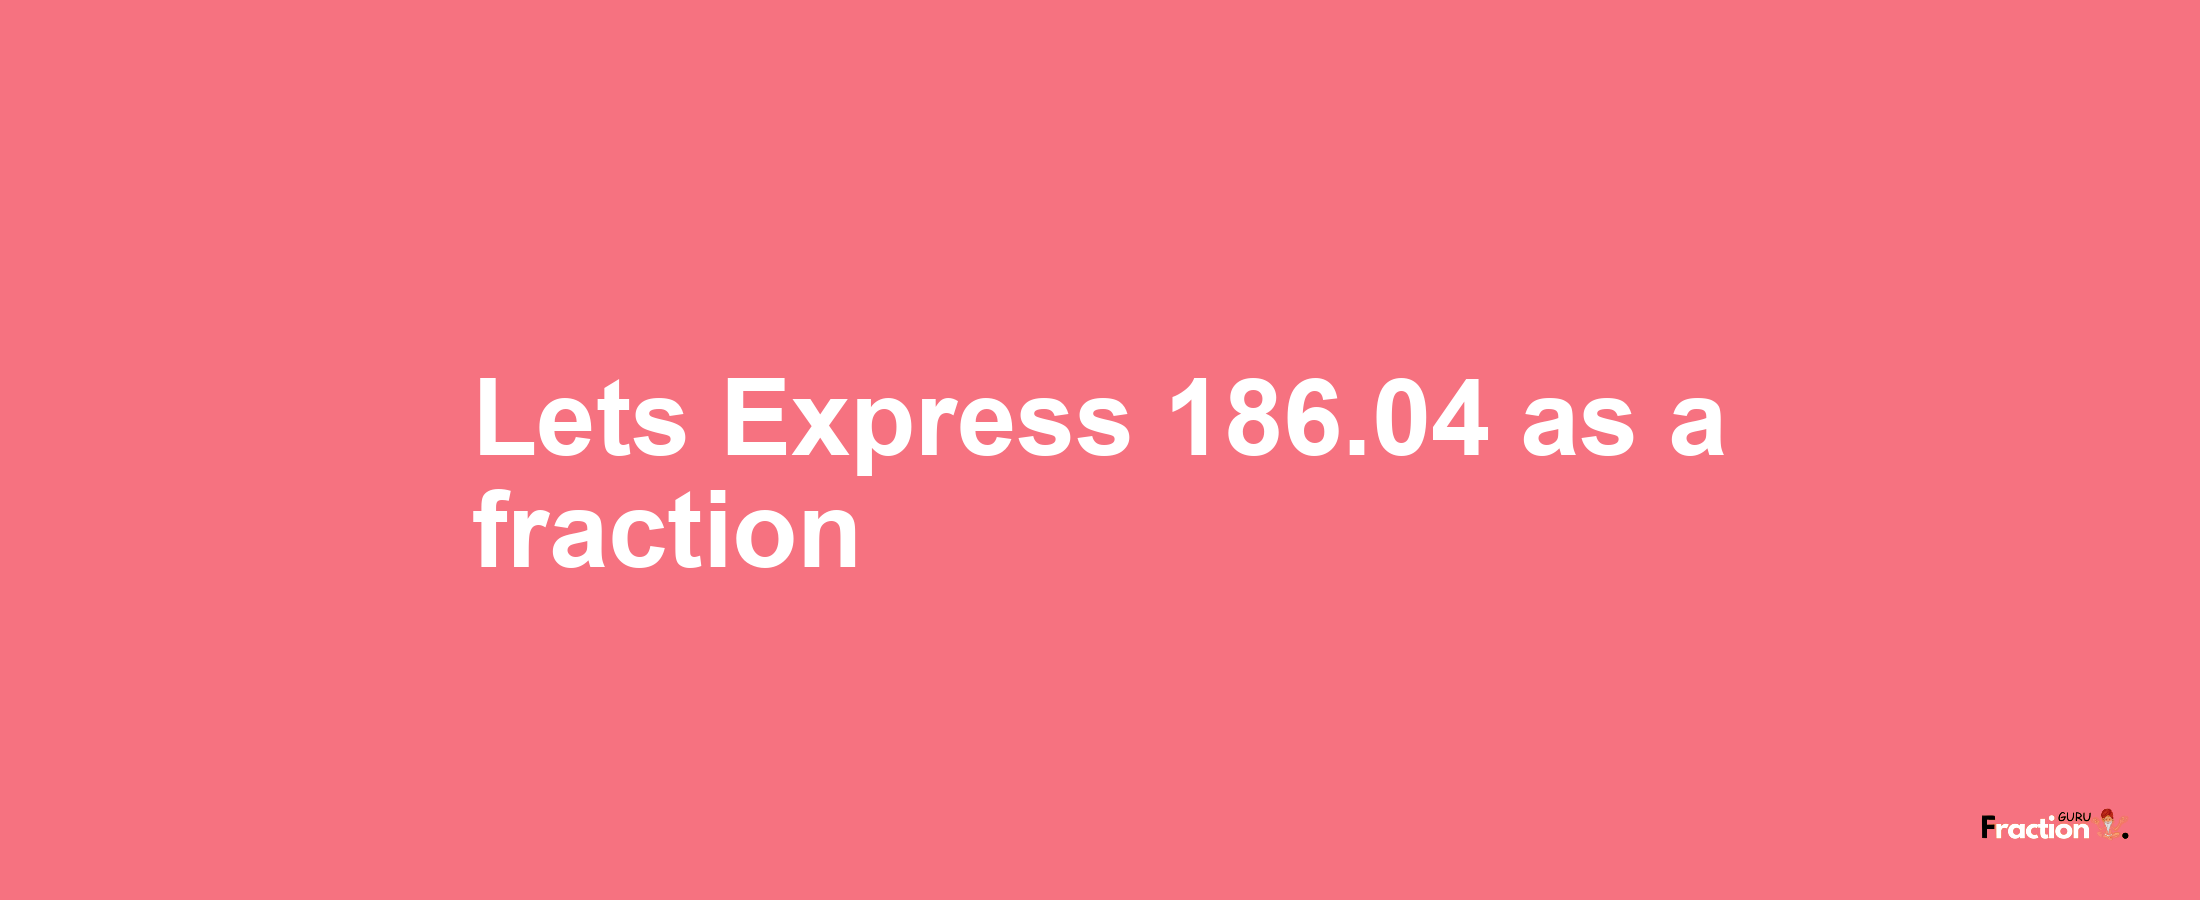 Lets Express 186.04 as afraction